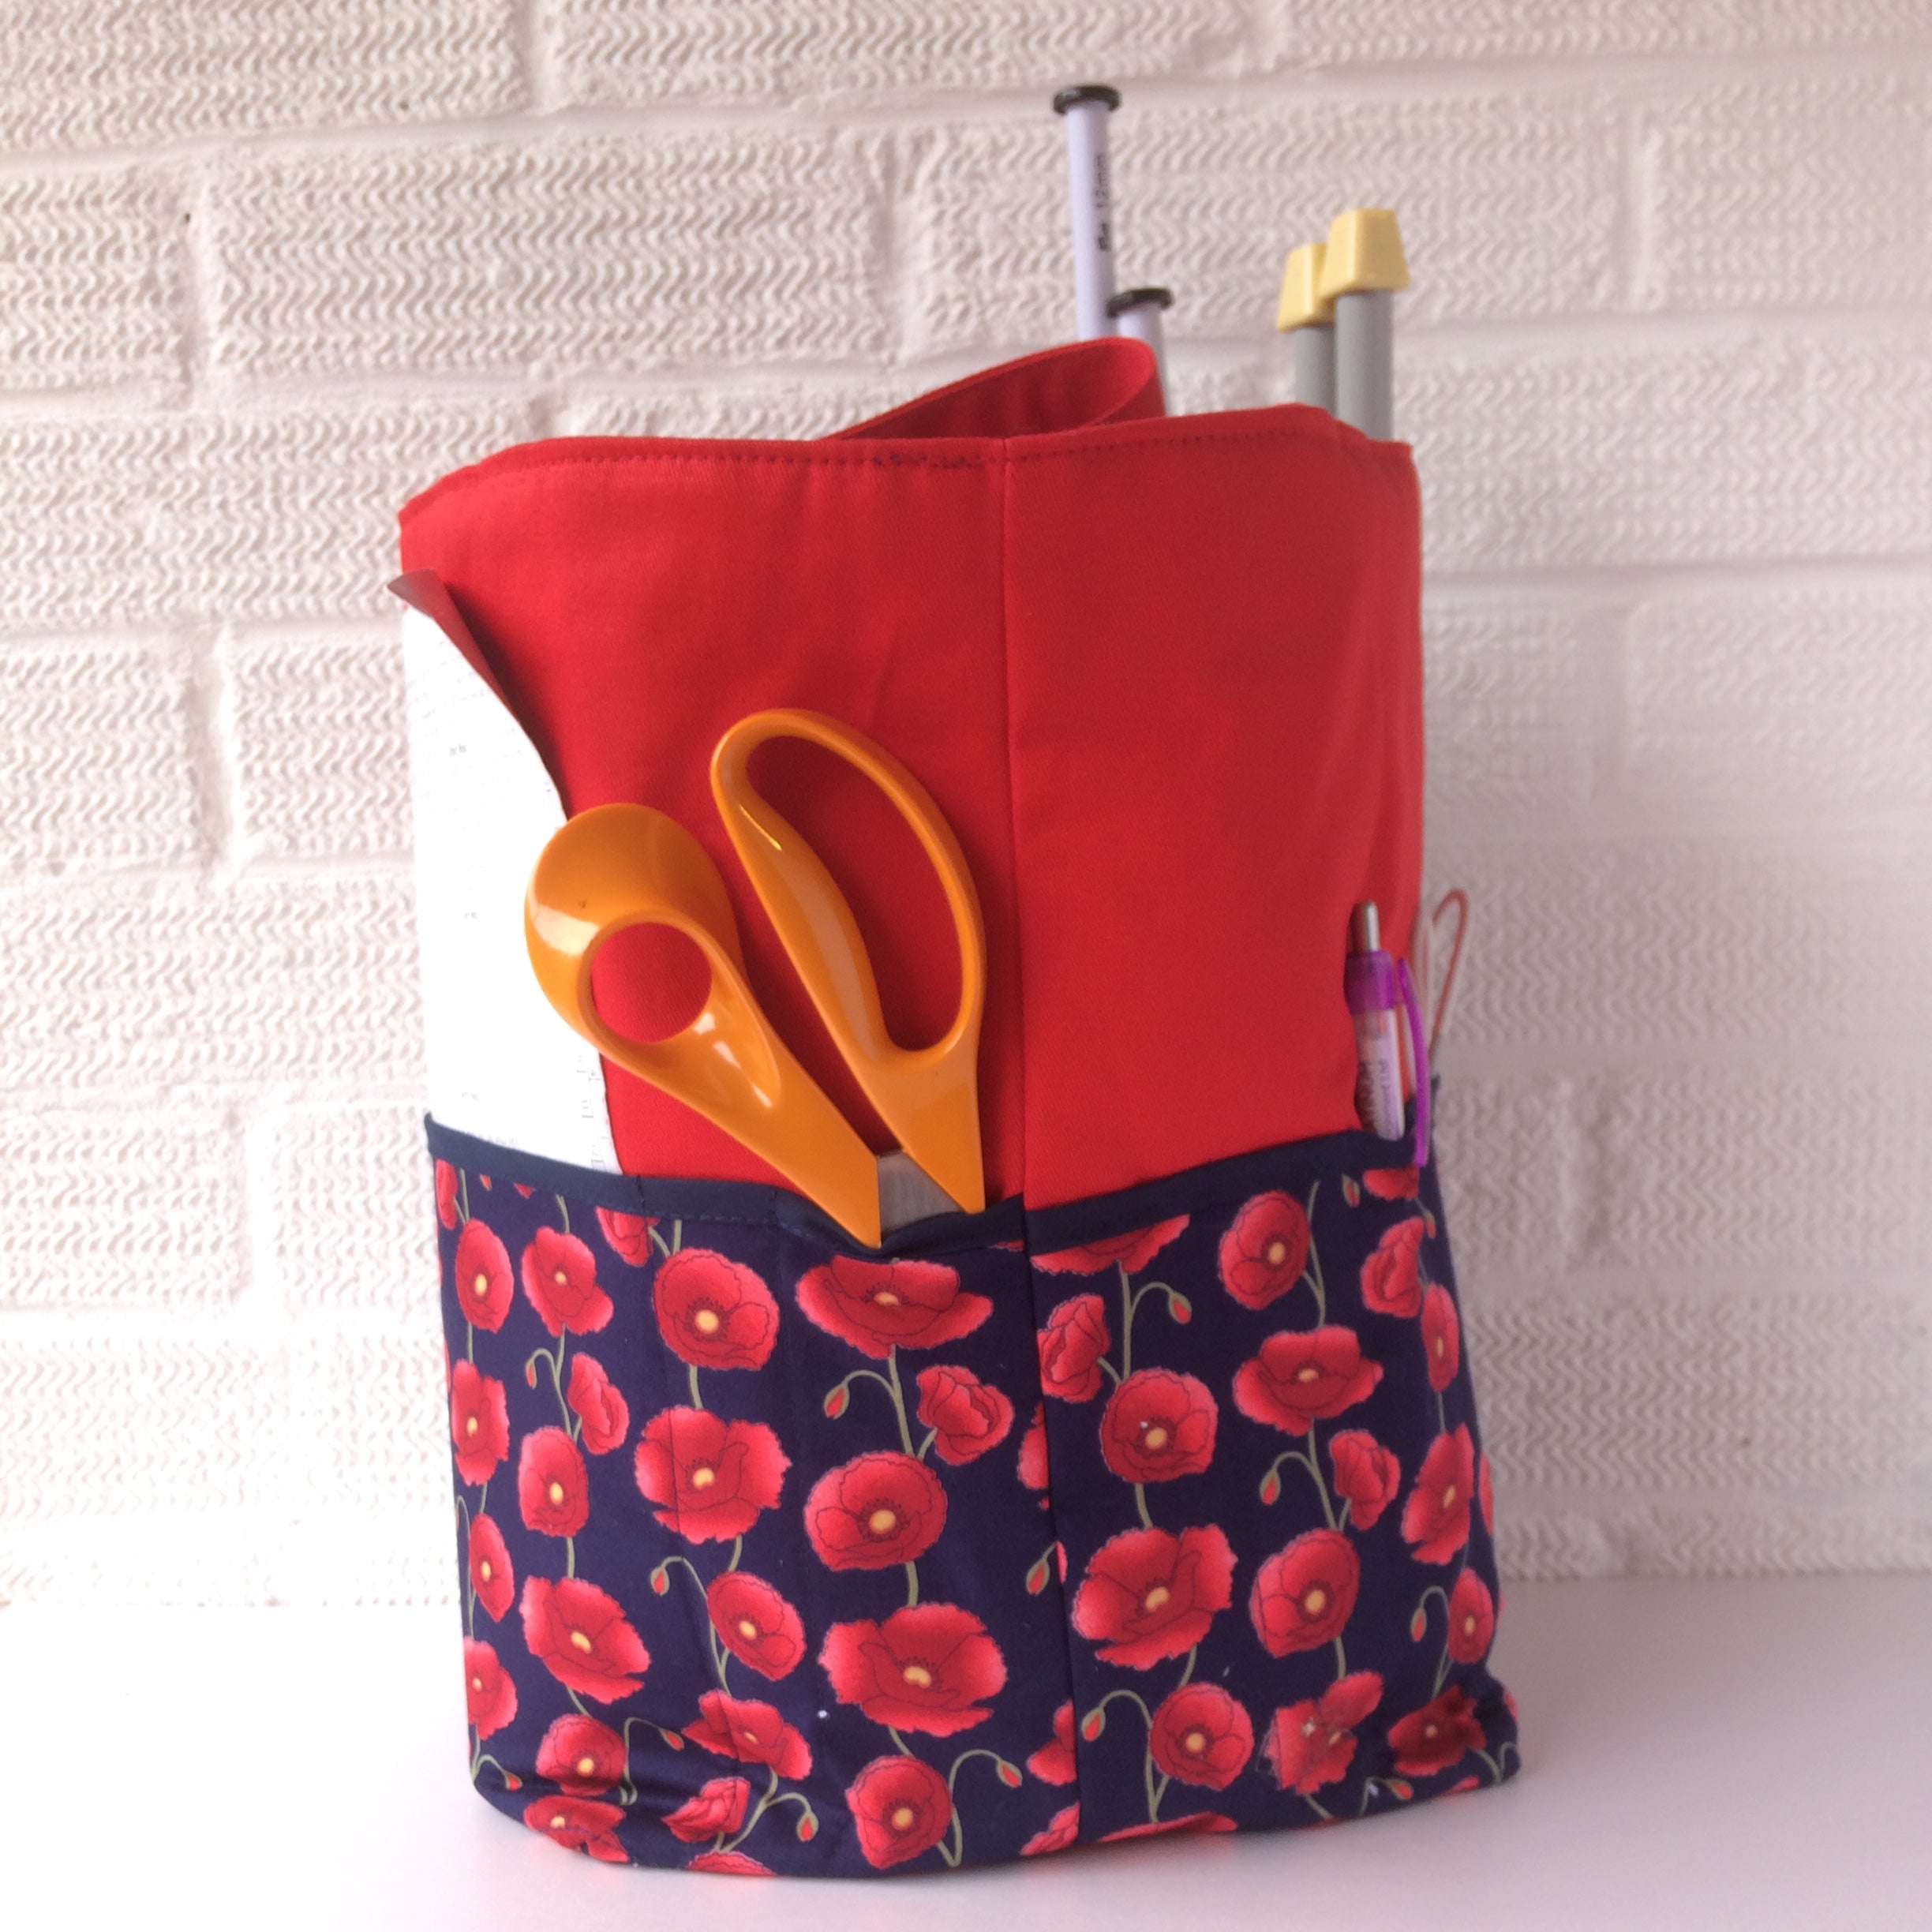 Red poppy knitting bag with side pockets for your needles and roomy inside for your projects